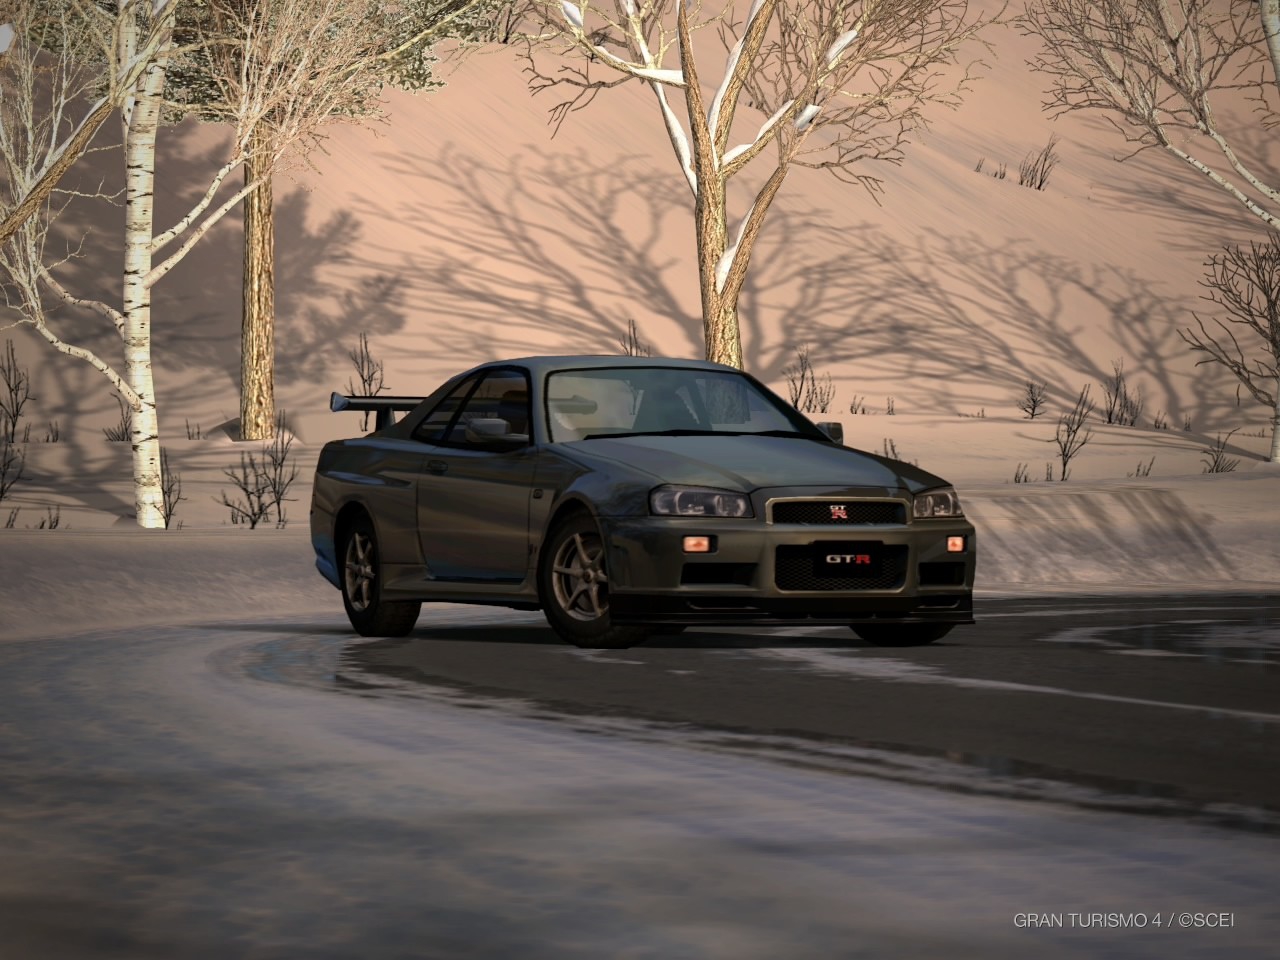 cars vehicles front view gran turismo 4 1280x960 wallpaper